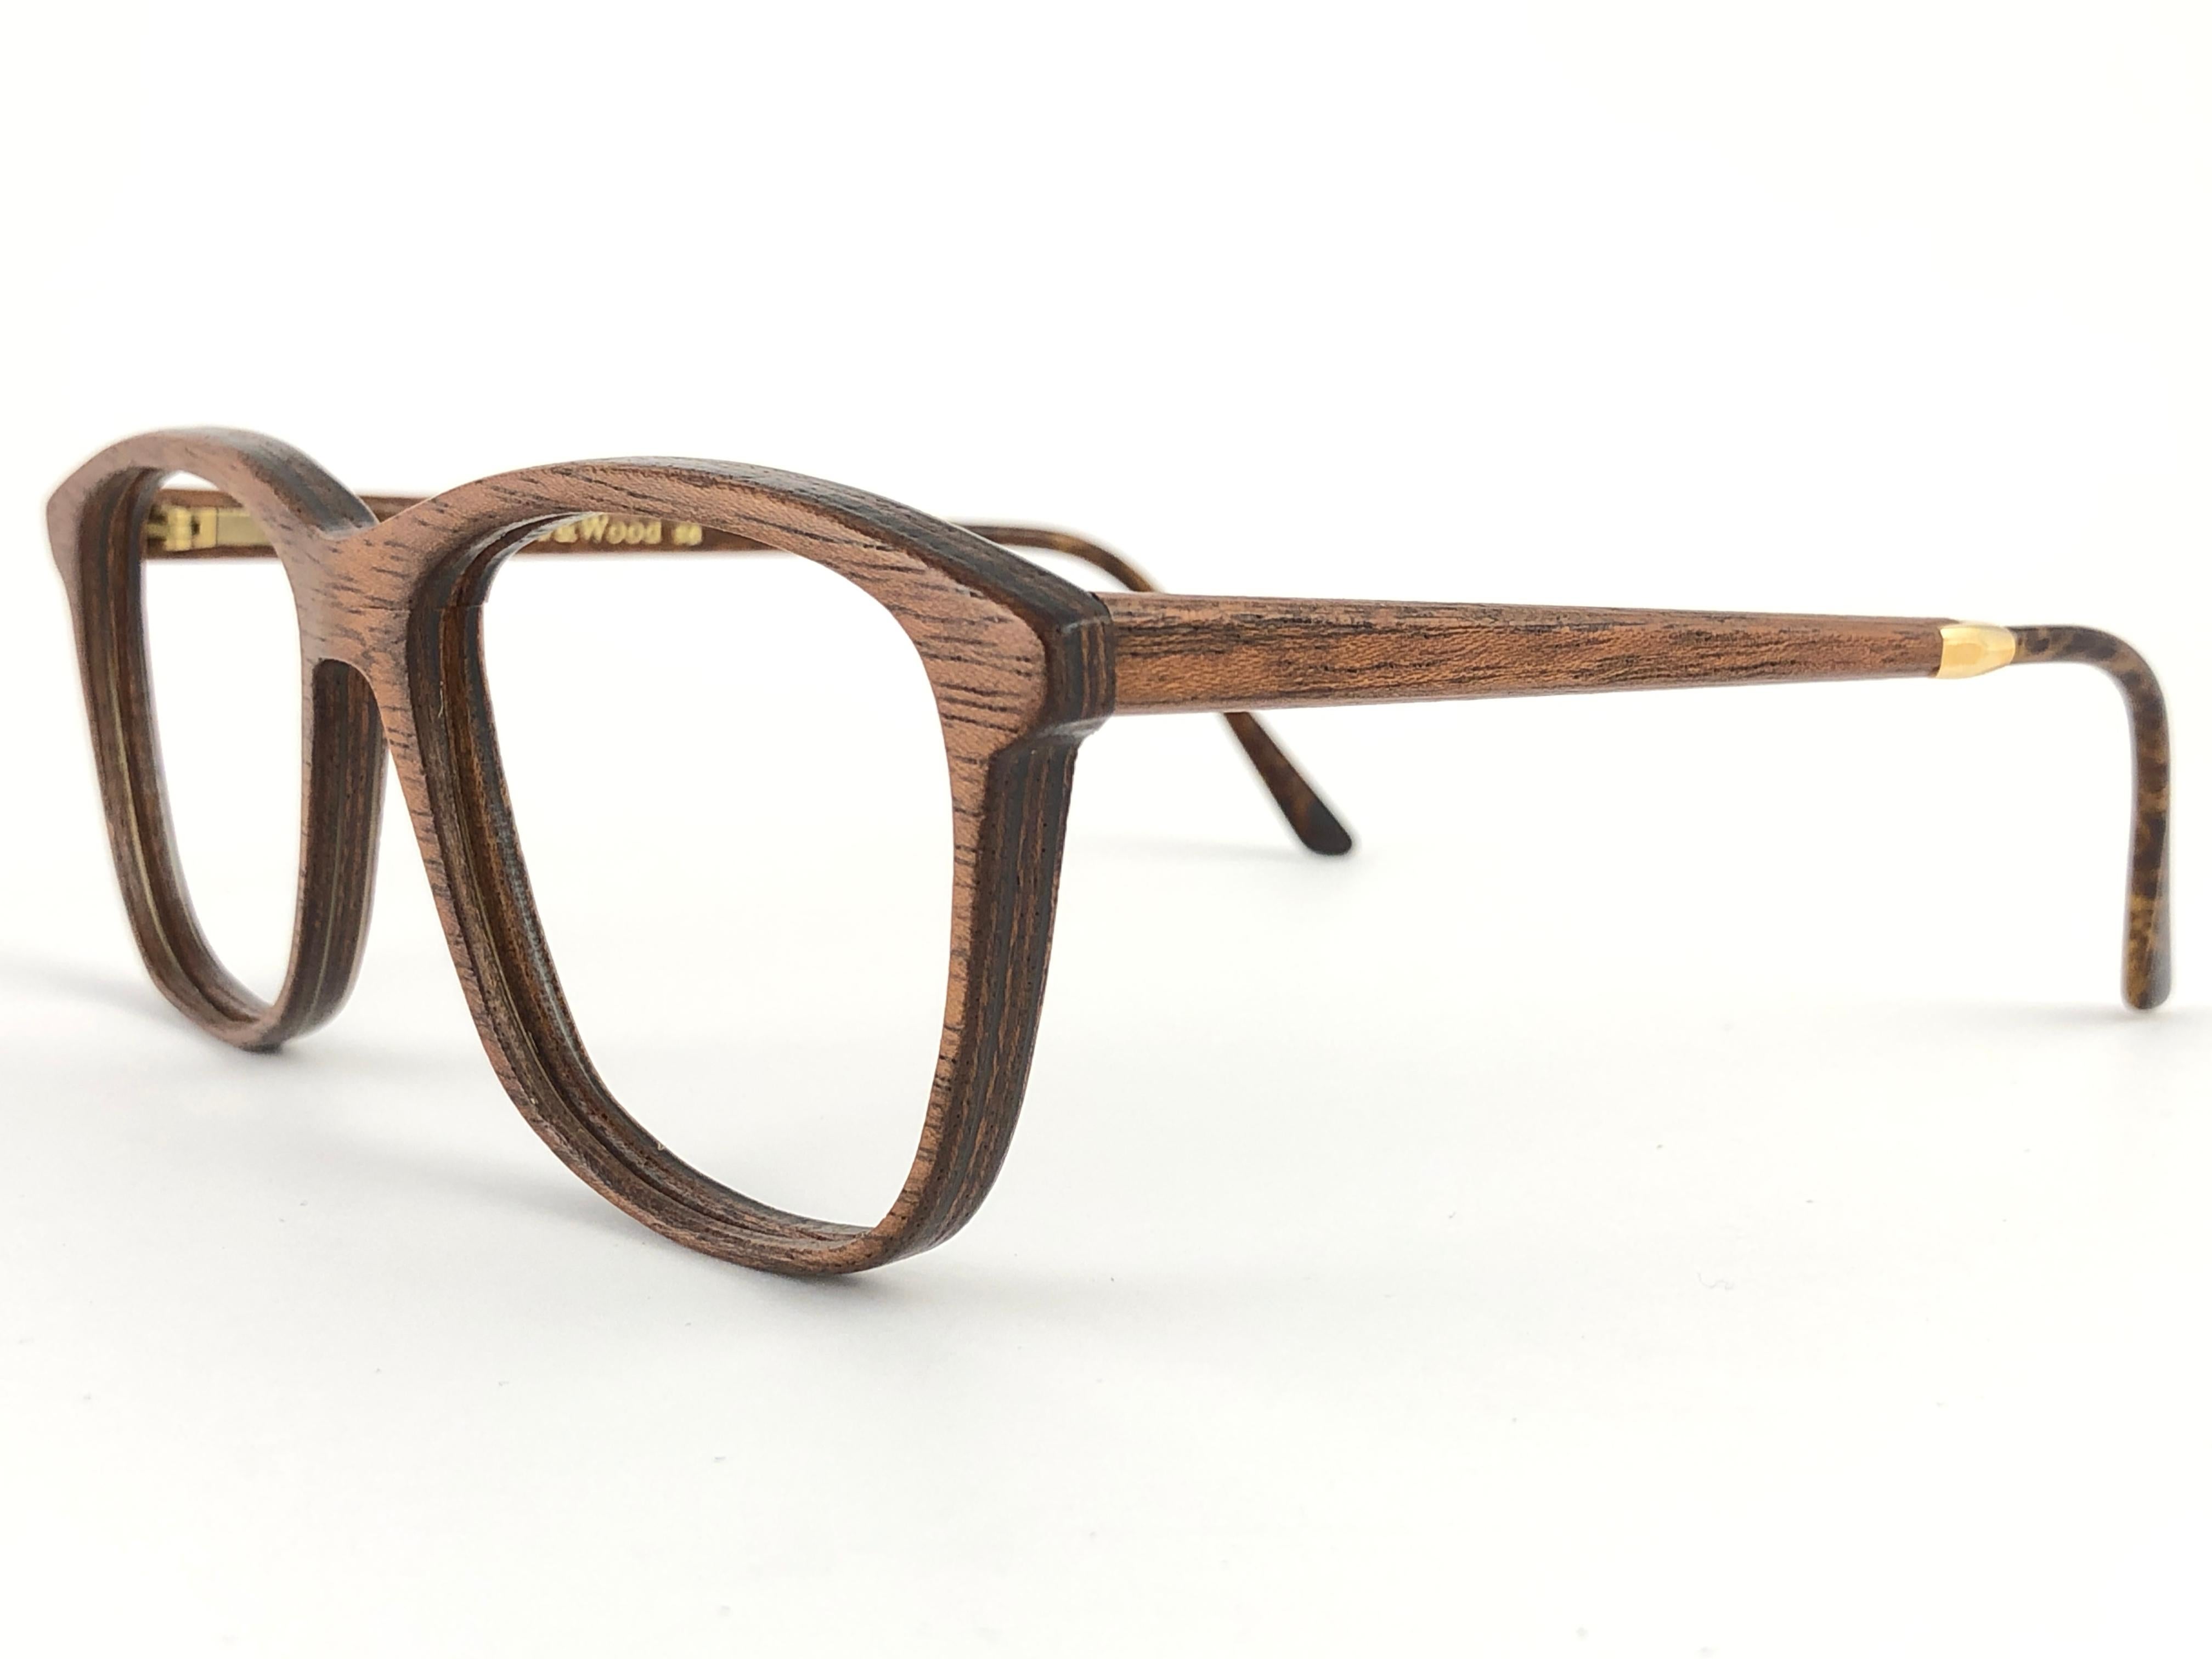 New Vintage Gold & Wood Paris genuine wood frame ready for prescription or reading lenses.
New, never worn or displayed. This pair may have minor sign of wear due to storage. 

Made in France.

Measurements

Frame Width  14.5 cms
Lens Height  4.4